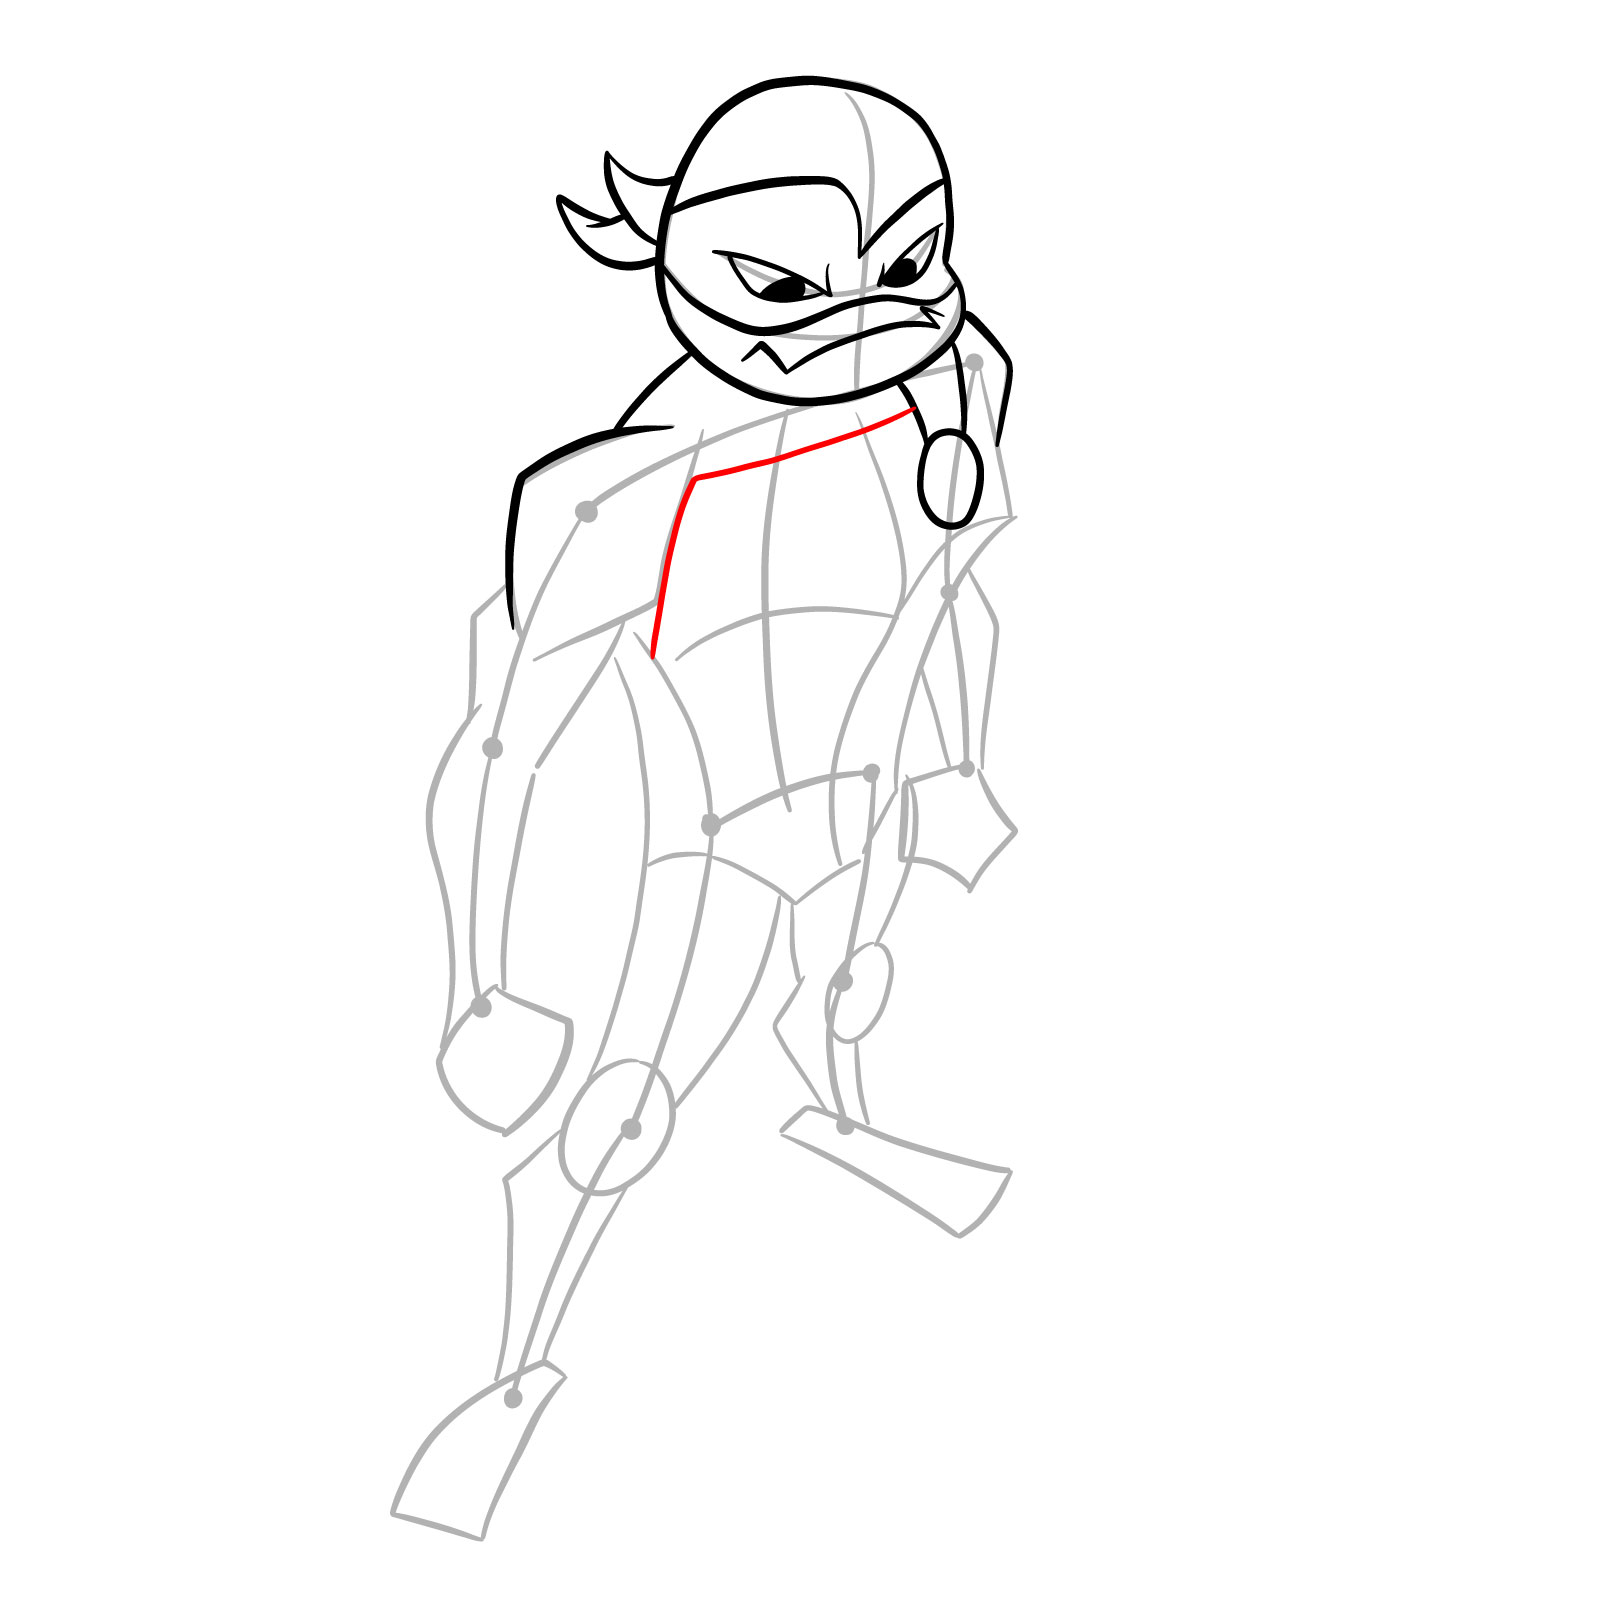 How to draw Mikey in Hamato Ninpō state - step 10